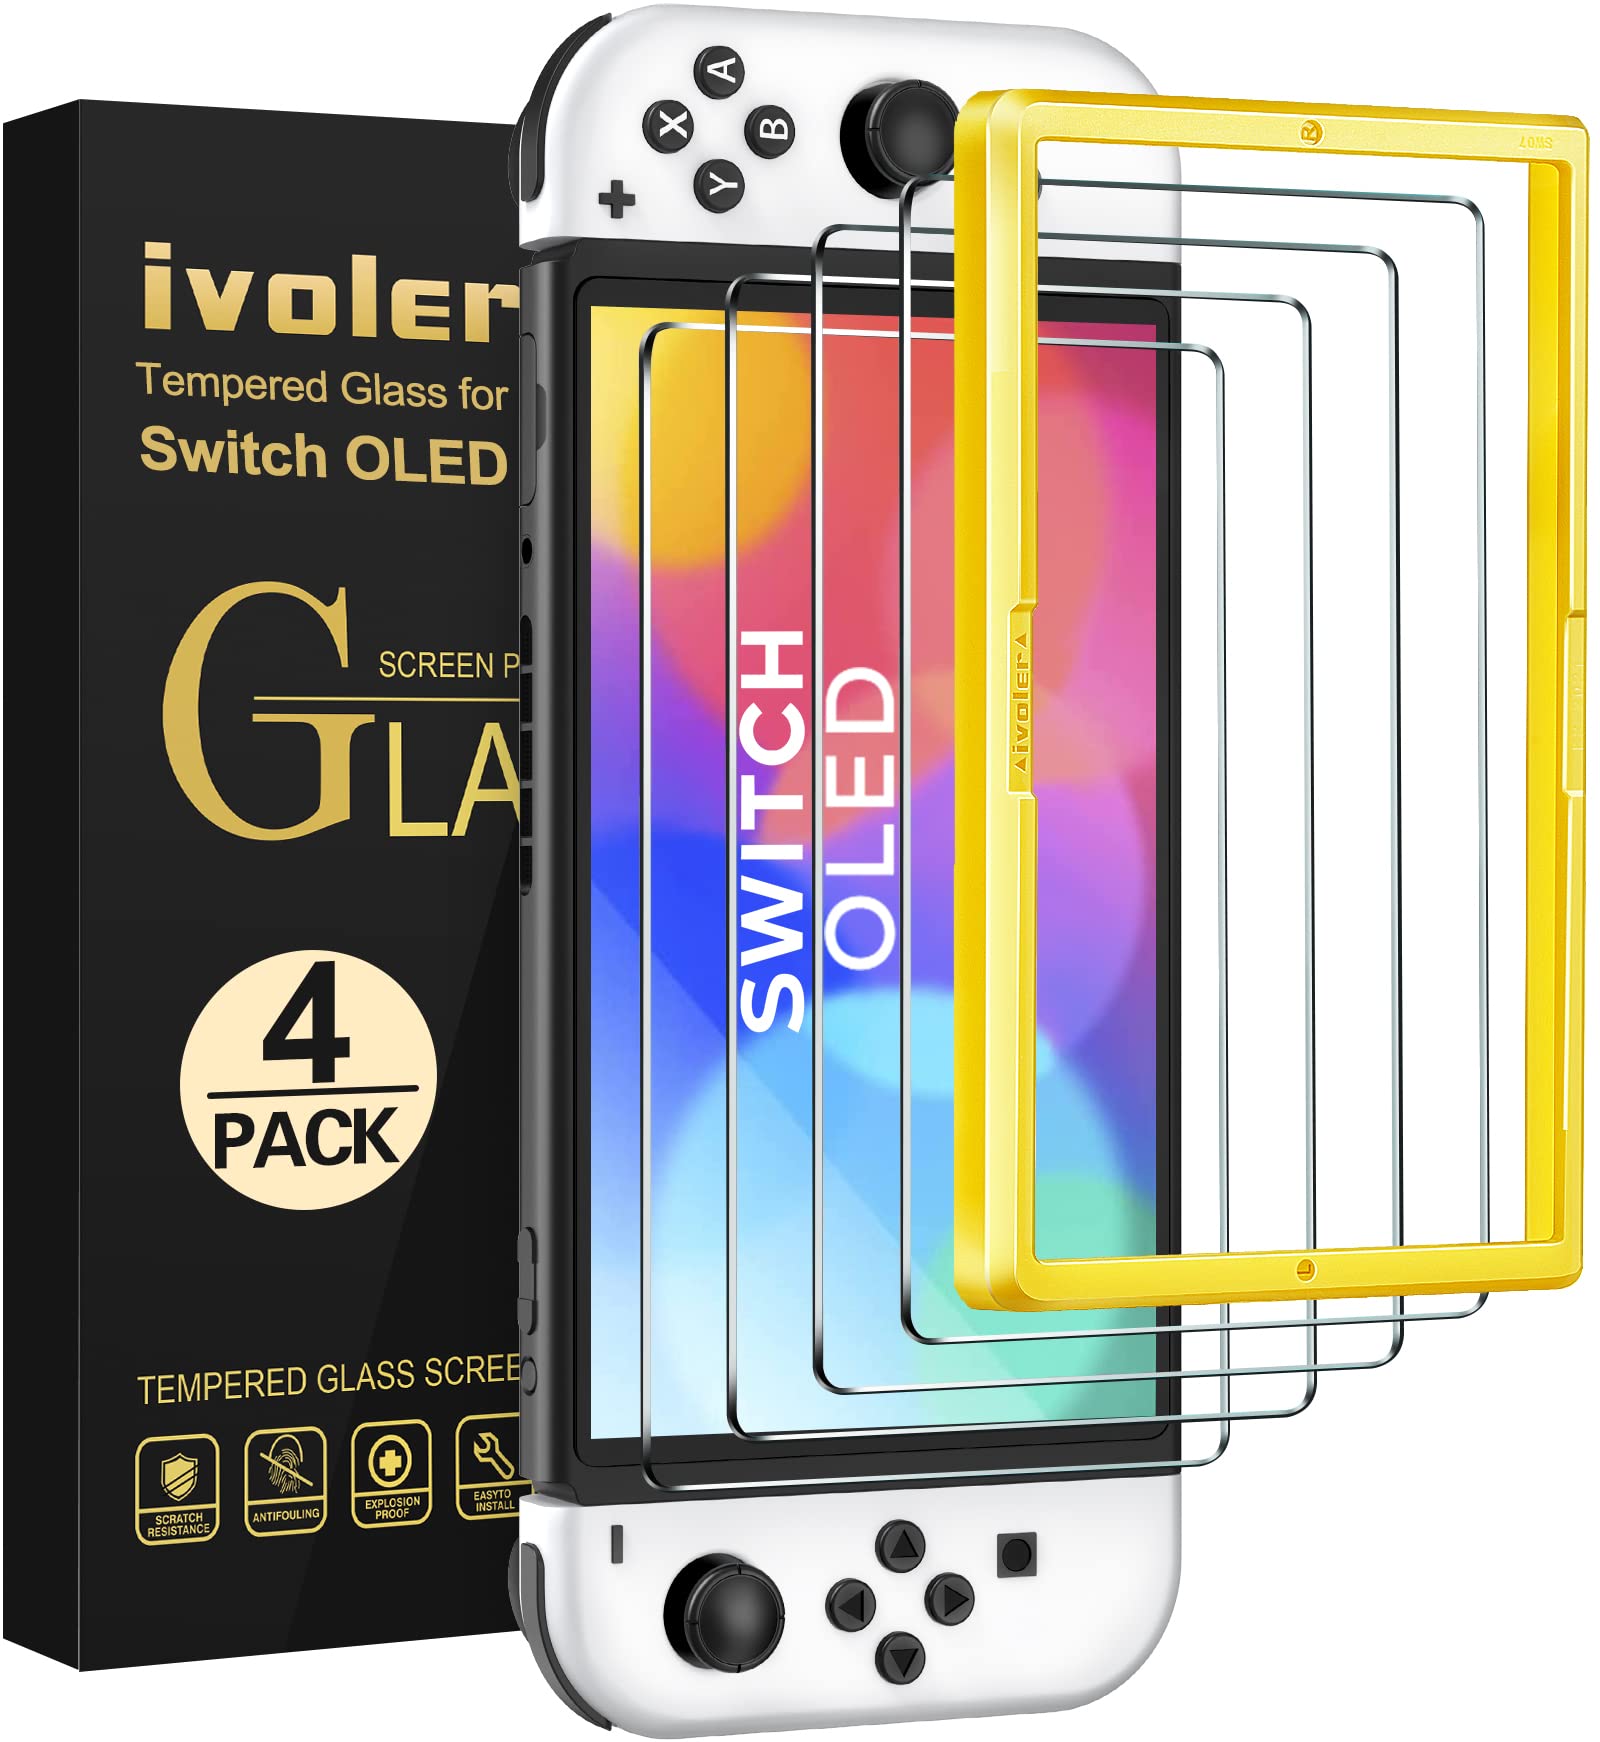 ivoler 4 Pack Screen Protector Compatible with Nintendo Switch OLED Model 7 '' 2021 with Easy Frame tool, Tempered Glass Protection Film - without air bubbles -Ultra Resistant Hardness 9H